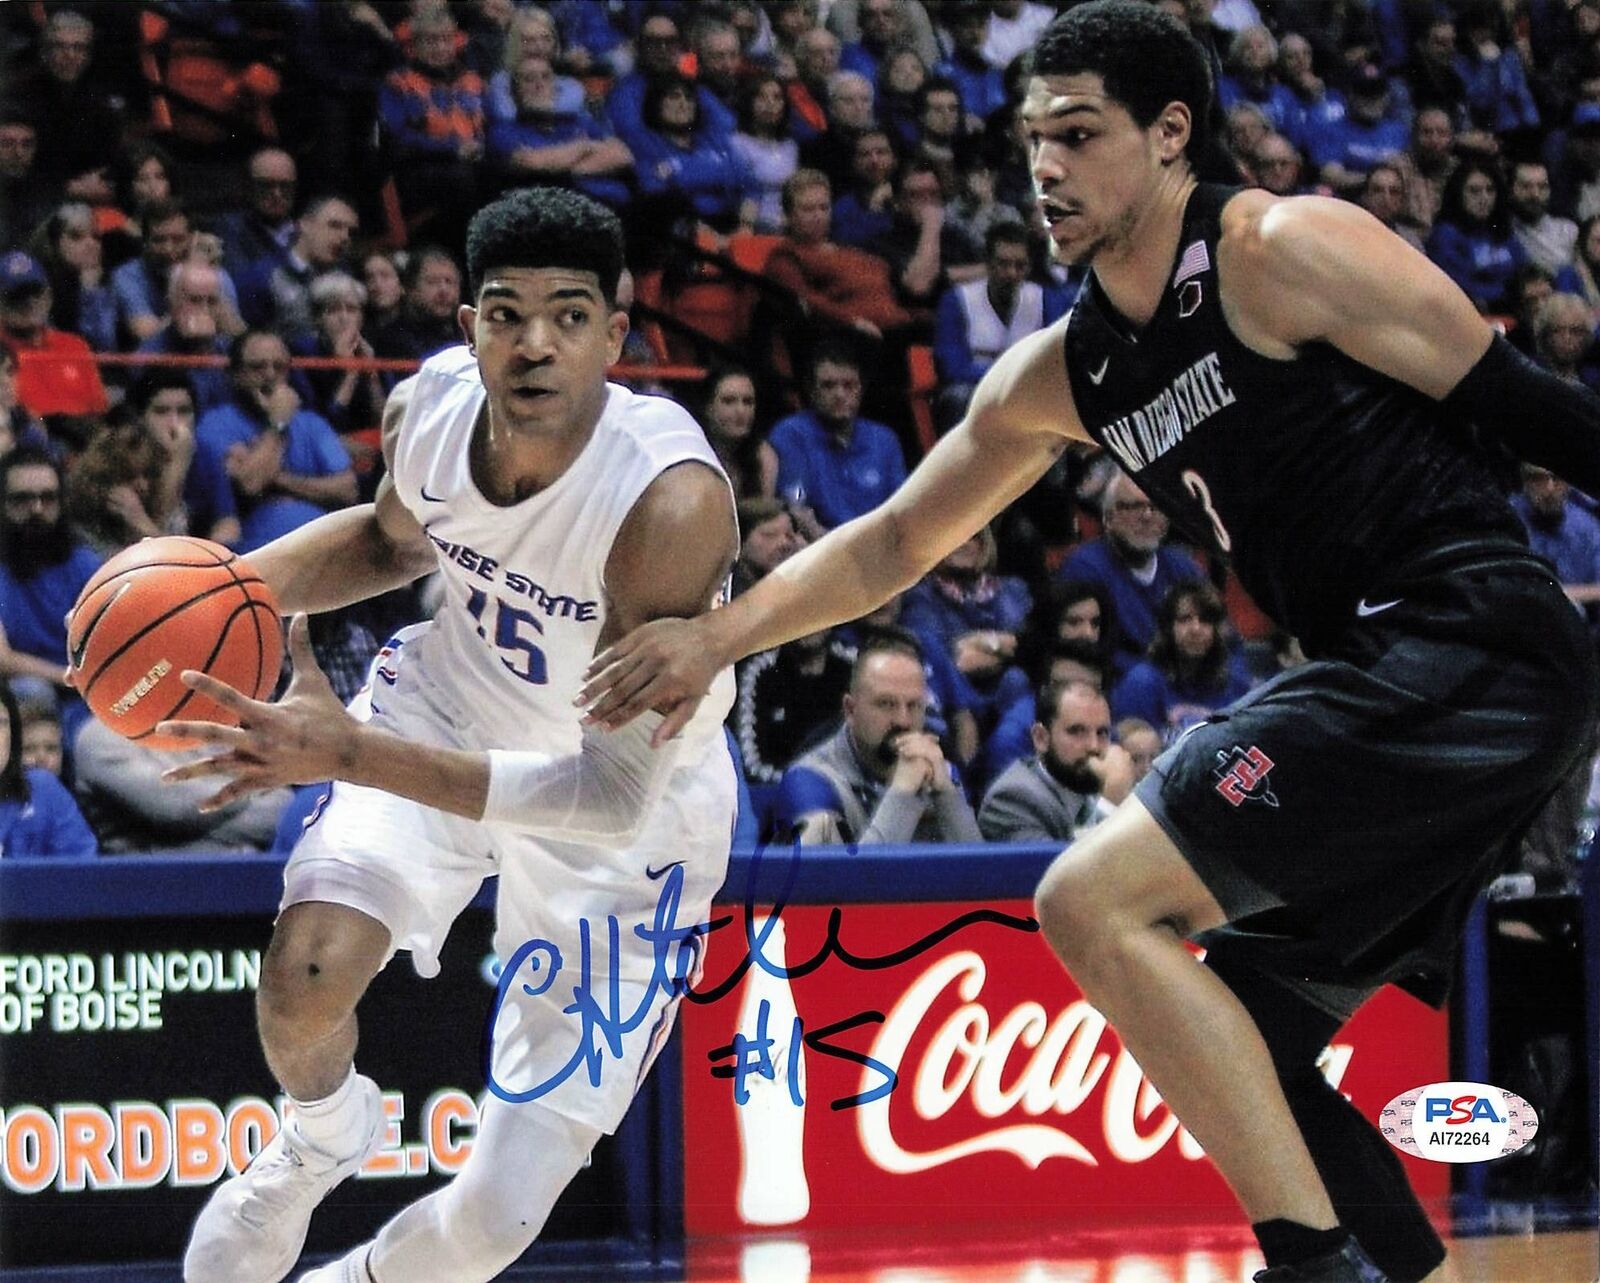 CHANDLER HUTCHISON signed 8x10 Photo Poster painting PSA/DNA Boise State Broncos Autographed